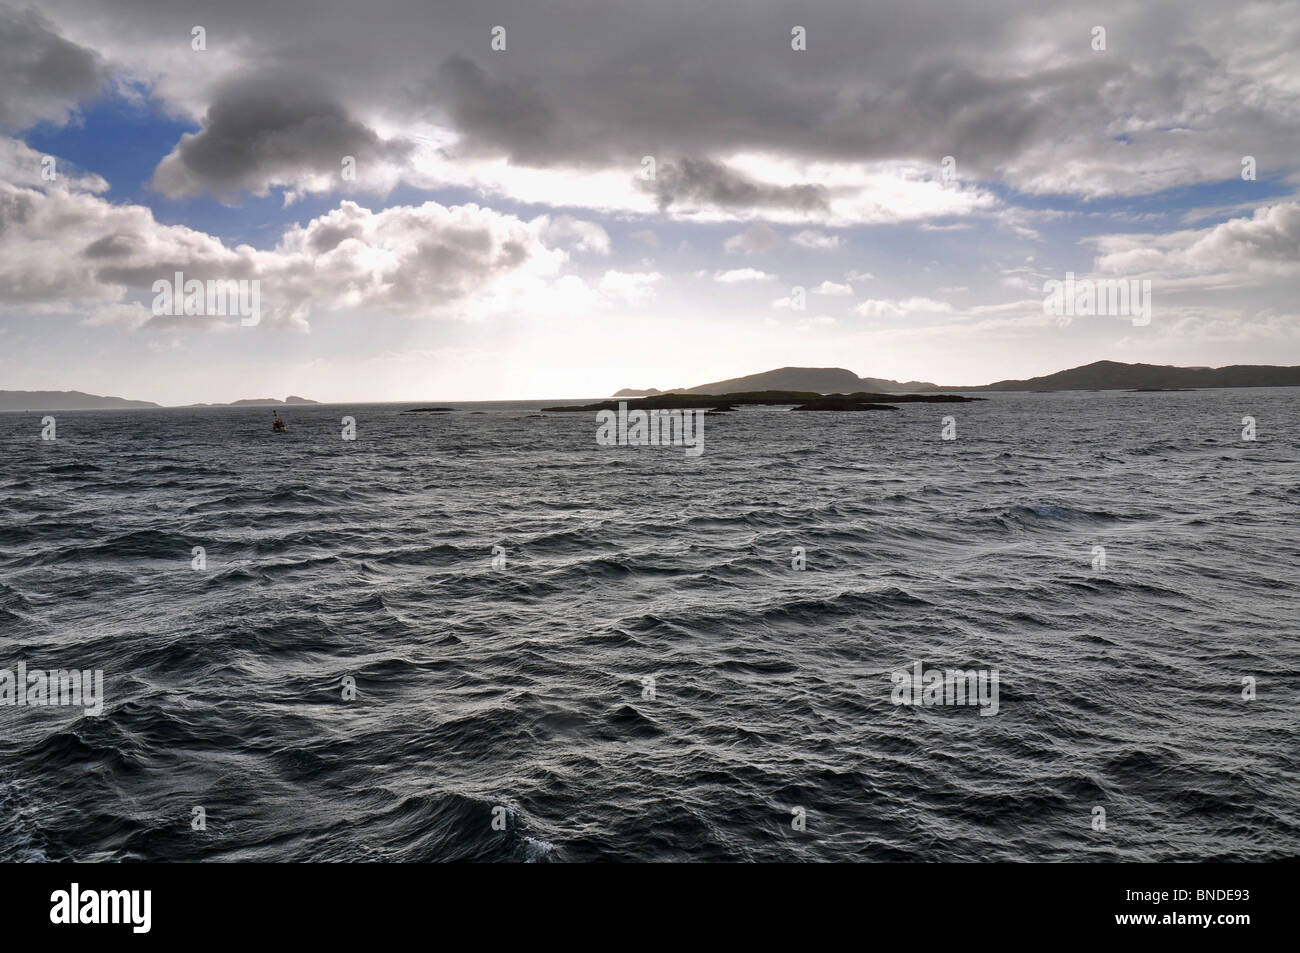 Barra, Outer Hebrides: Sound of Hellisay seen from deck of a ferry boat Stock Photo